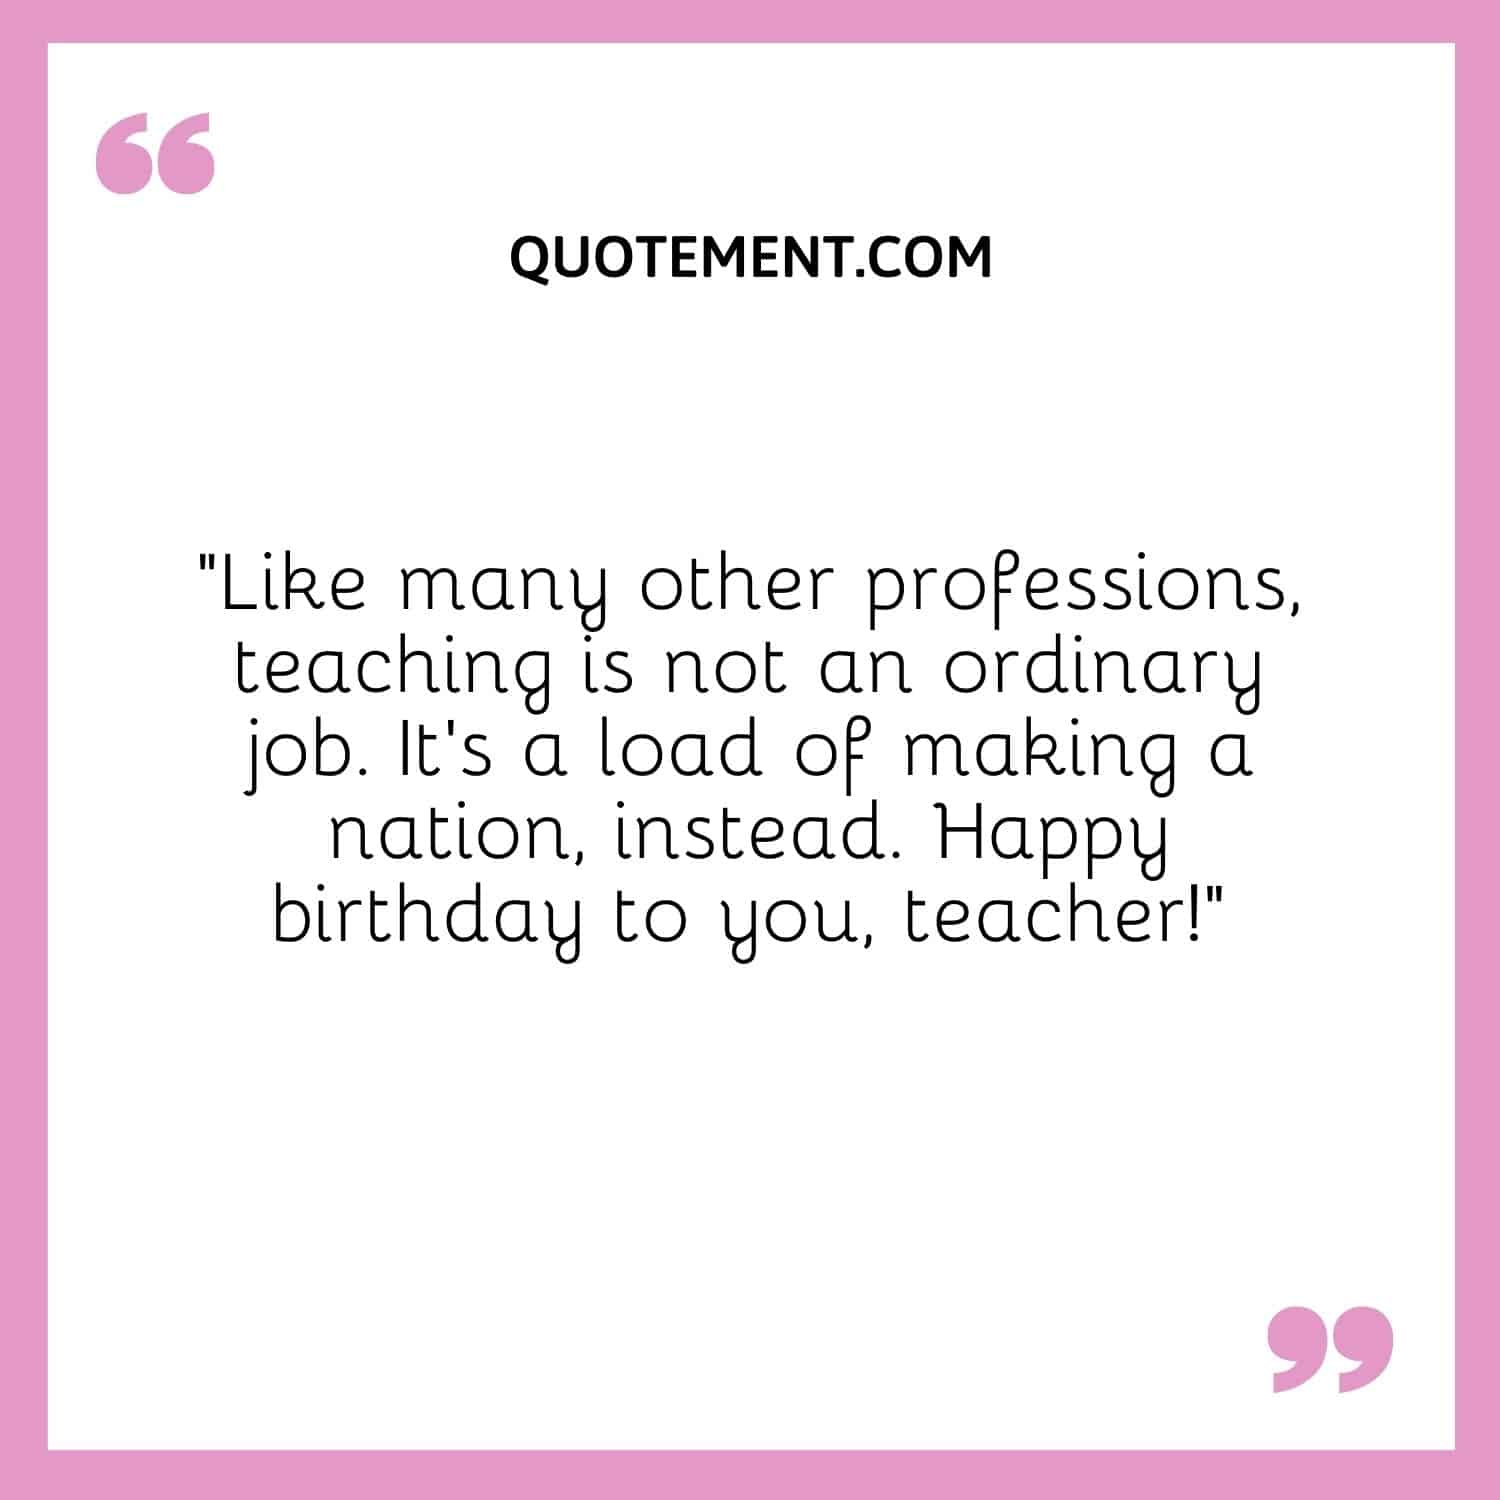 Like many other professions, teaching is not an ordinary job